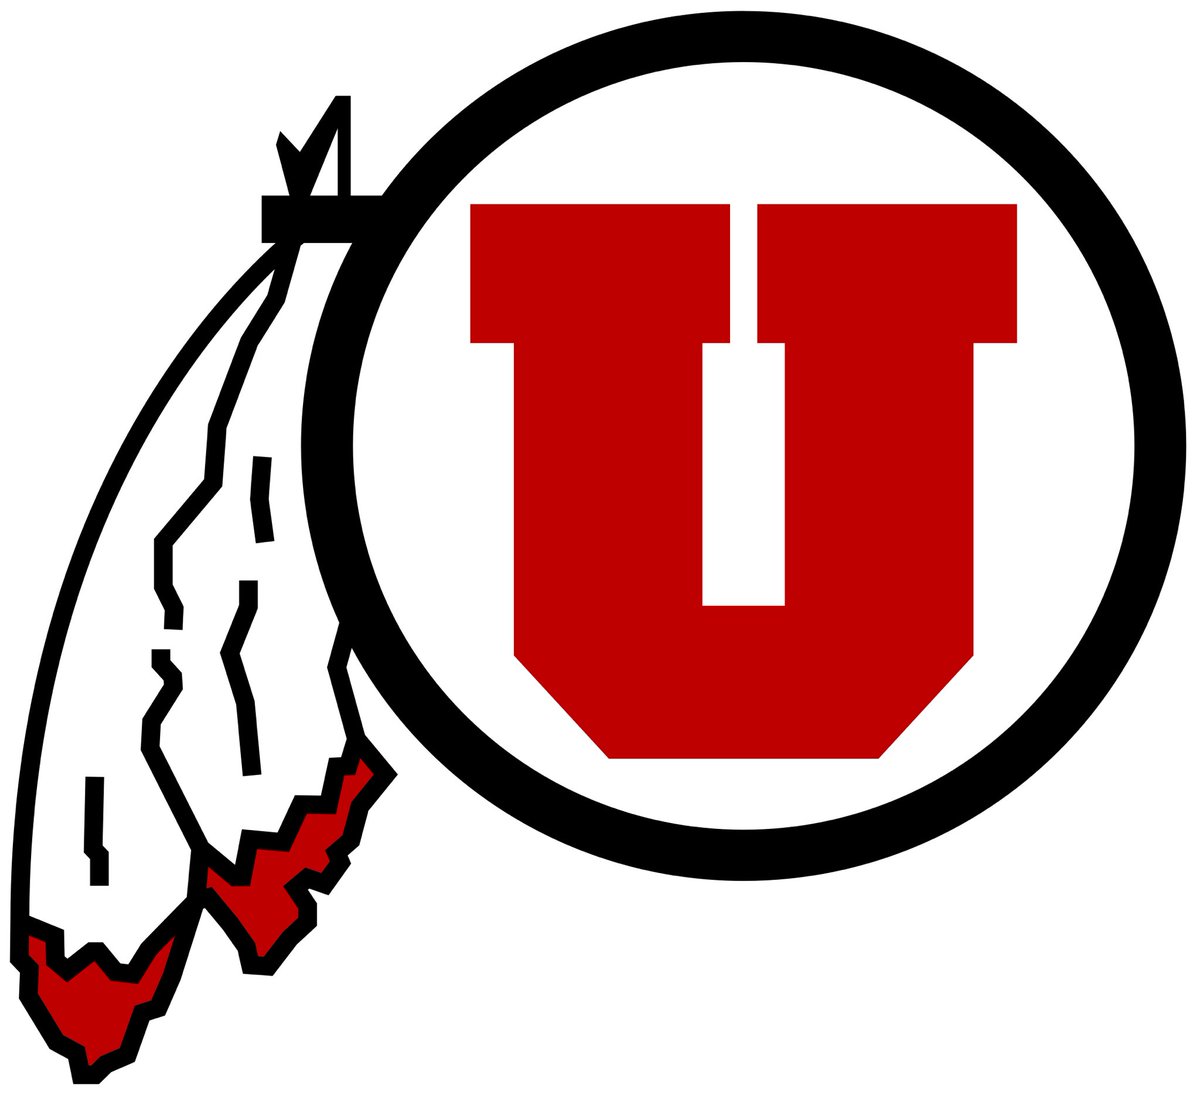 Blessed to receive an offer from the University of Utah! #GoUtes🔴⚪️